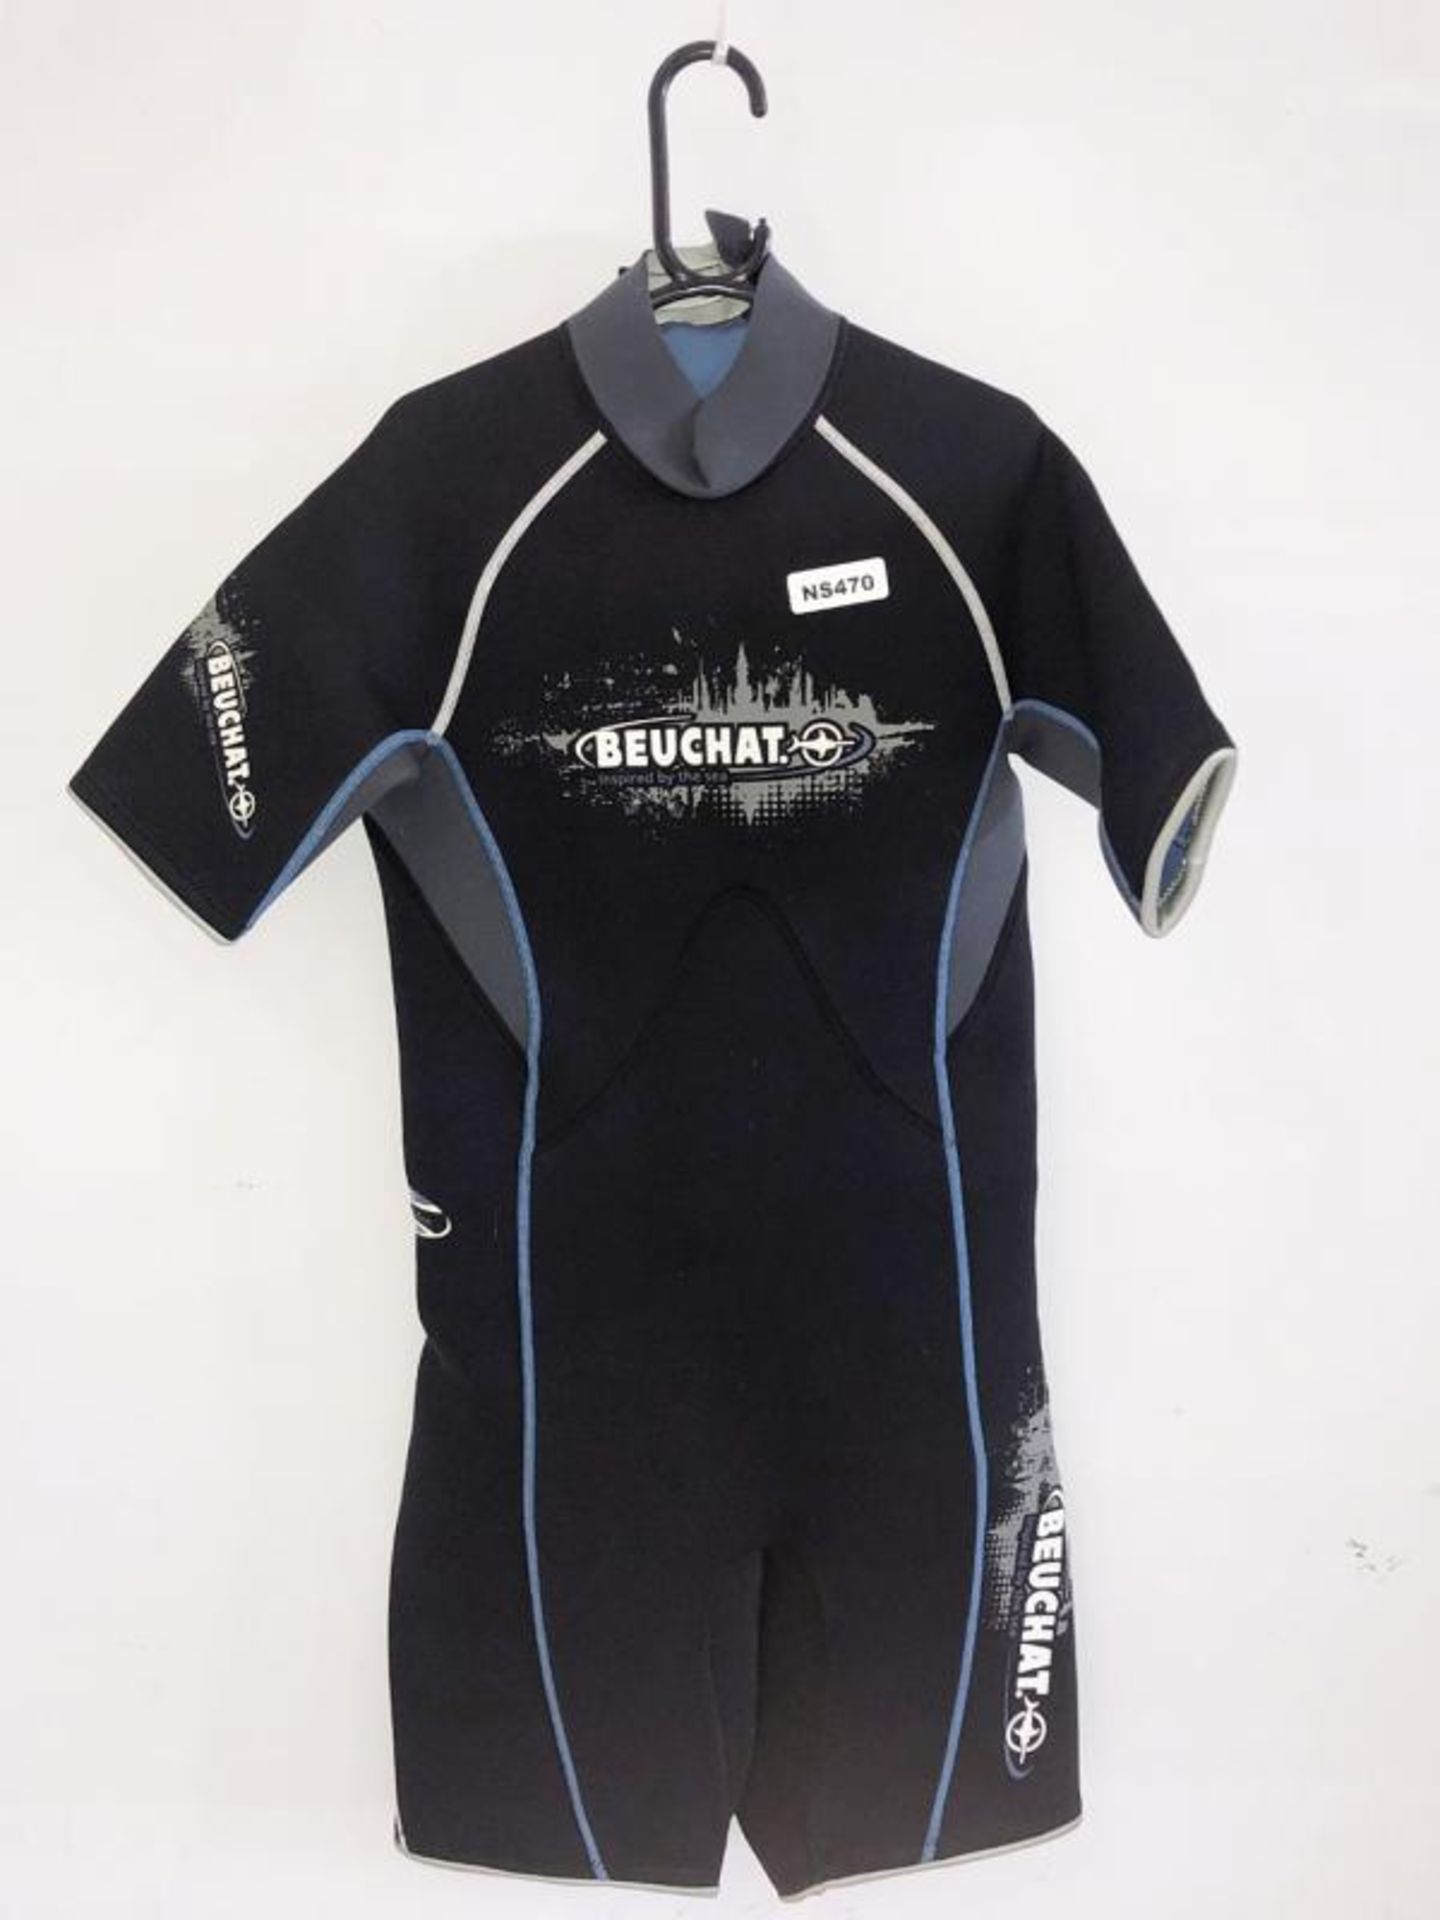 1 x New Beuchat Shorty Wetsuit Size Small - Ref: NS470 - CL349 - Location: Altrincham WA14